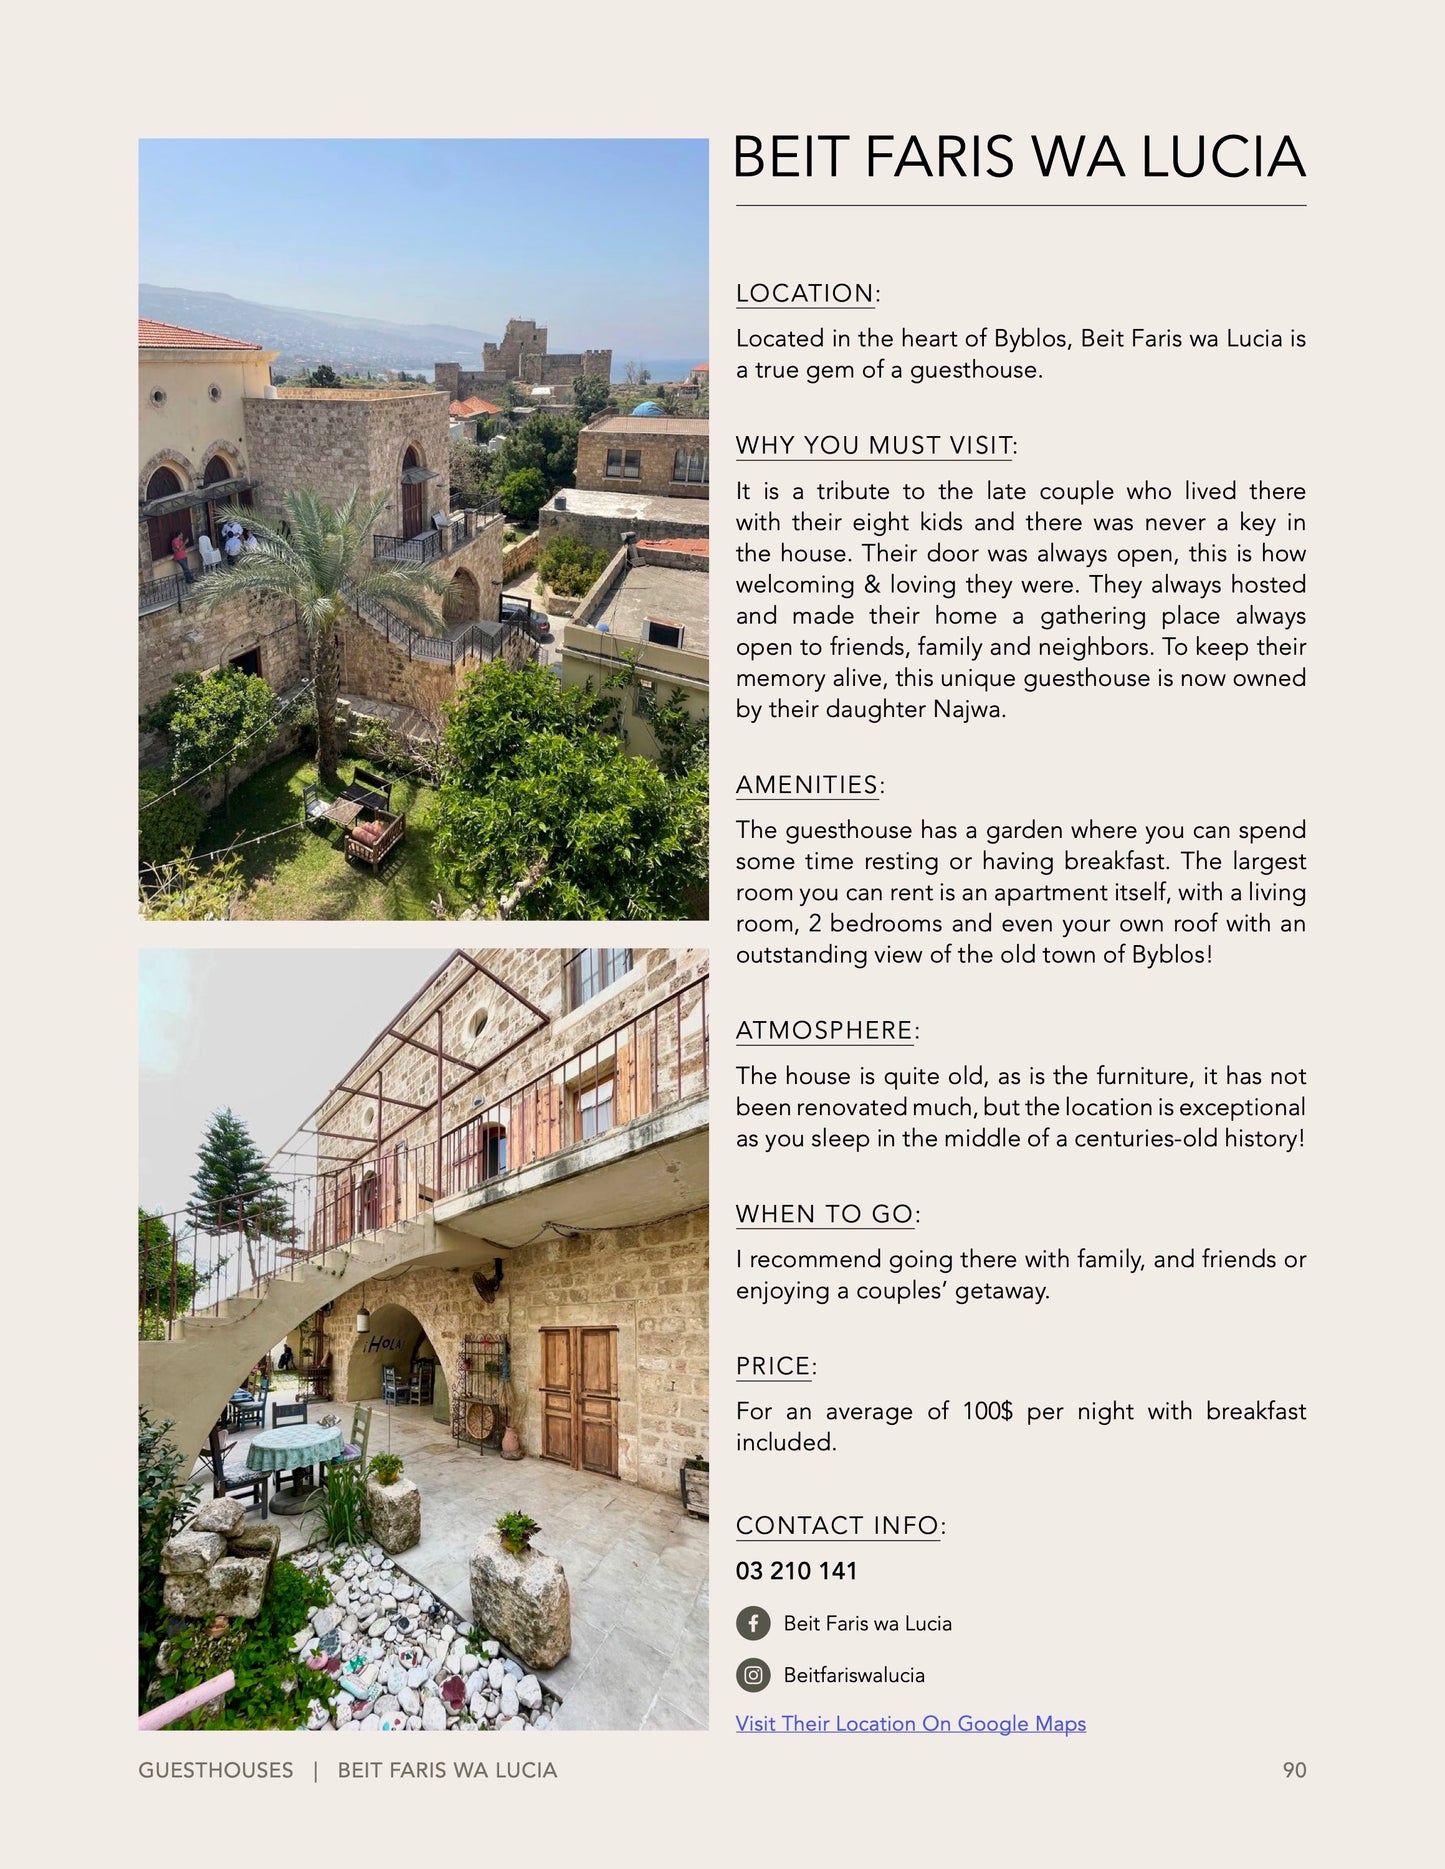 50 Summer Hidden Gems in Lebanon You Need To See (E-book)